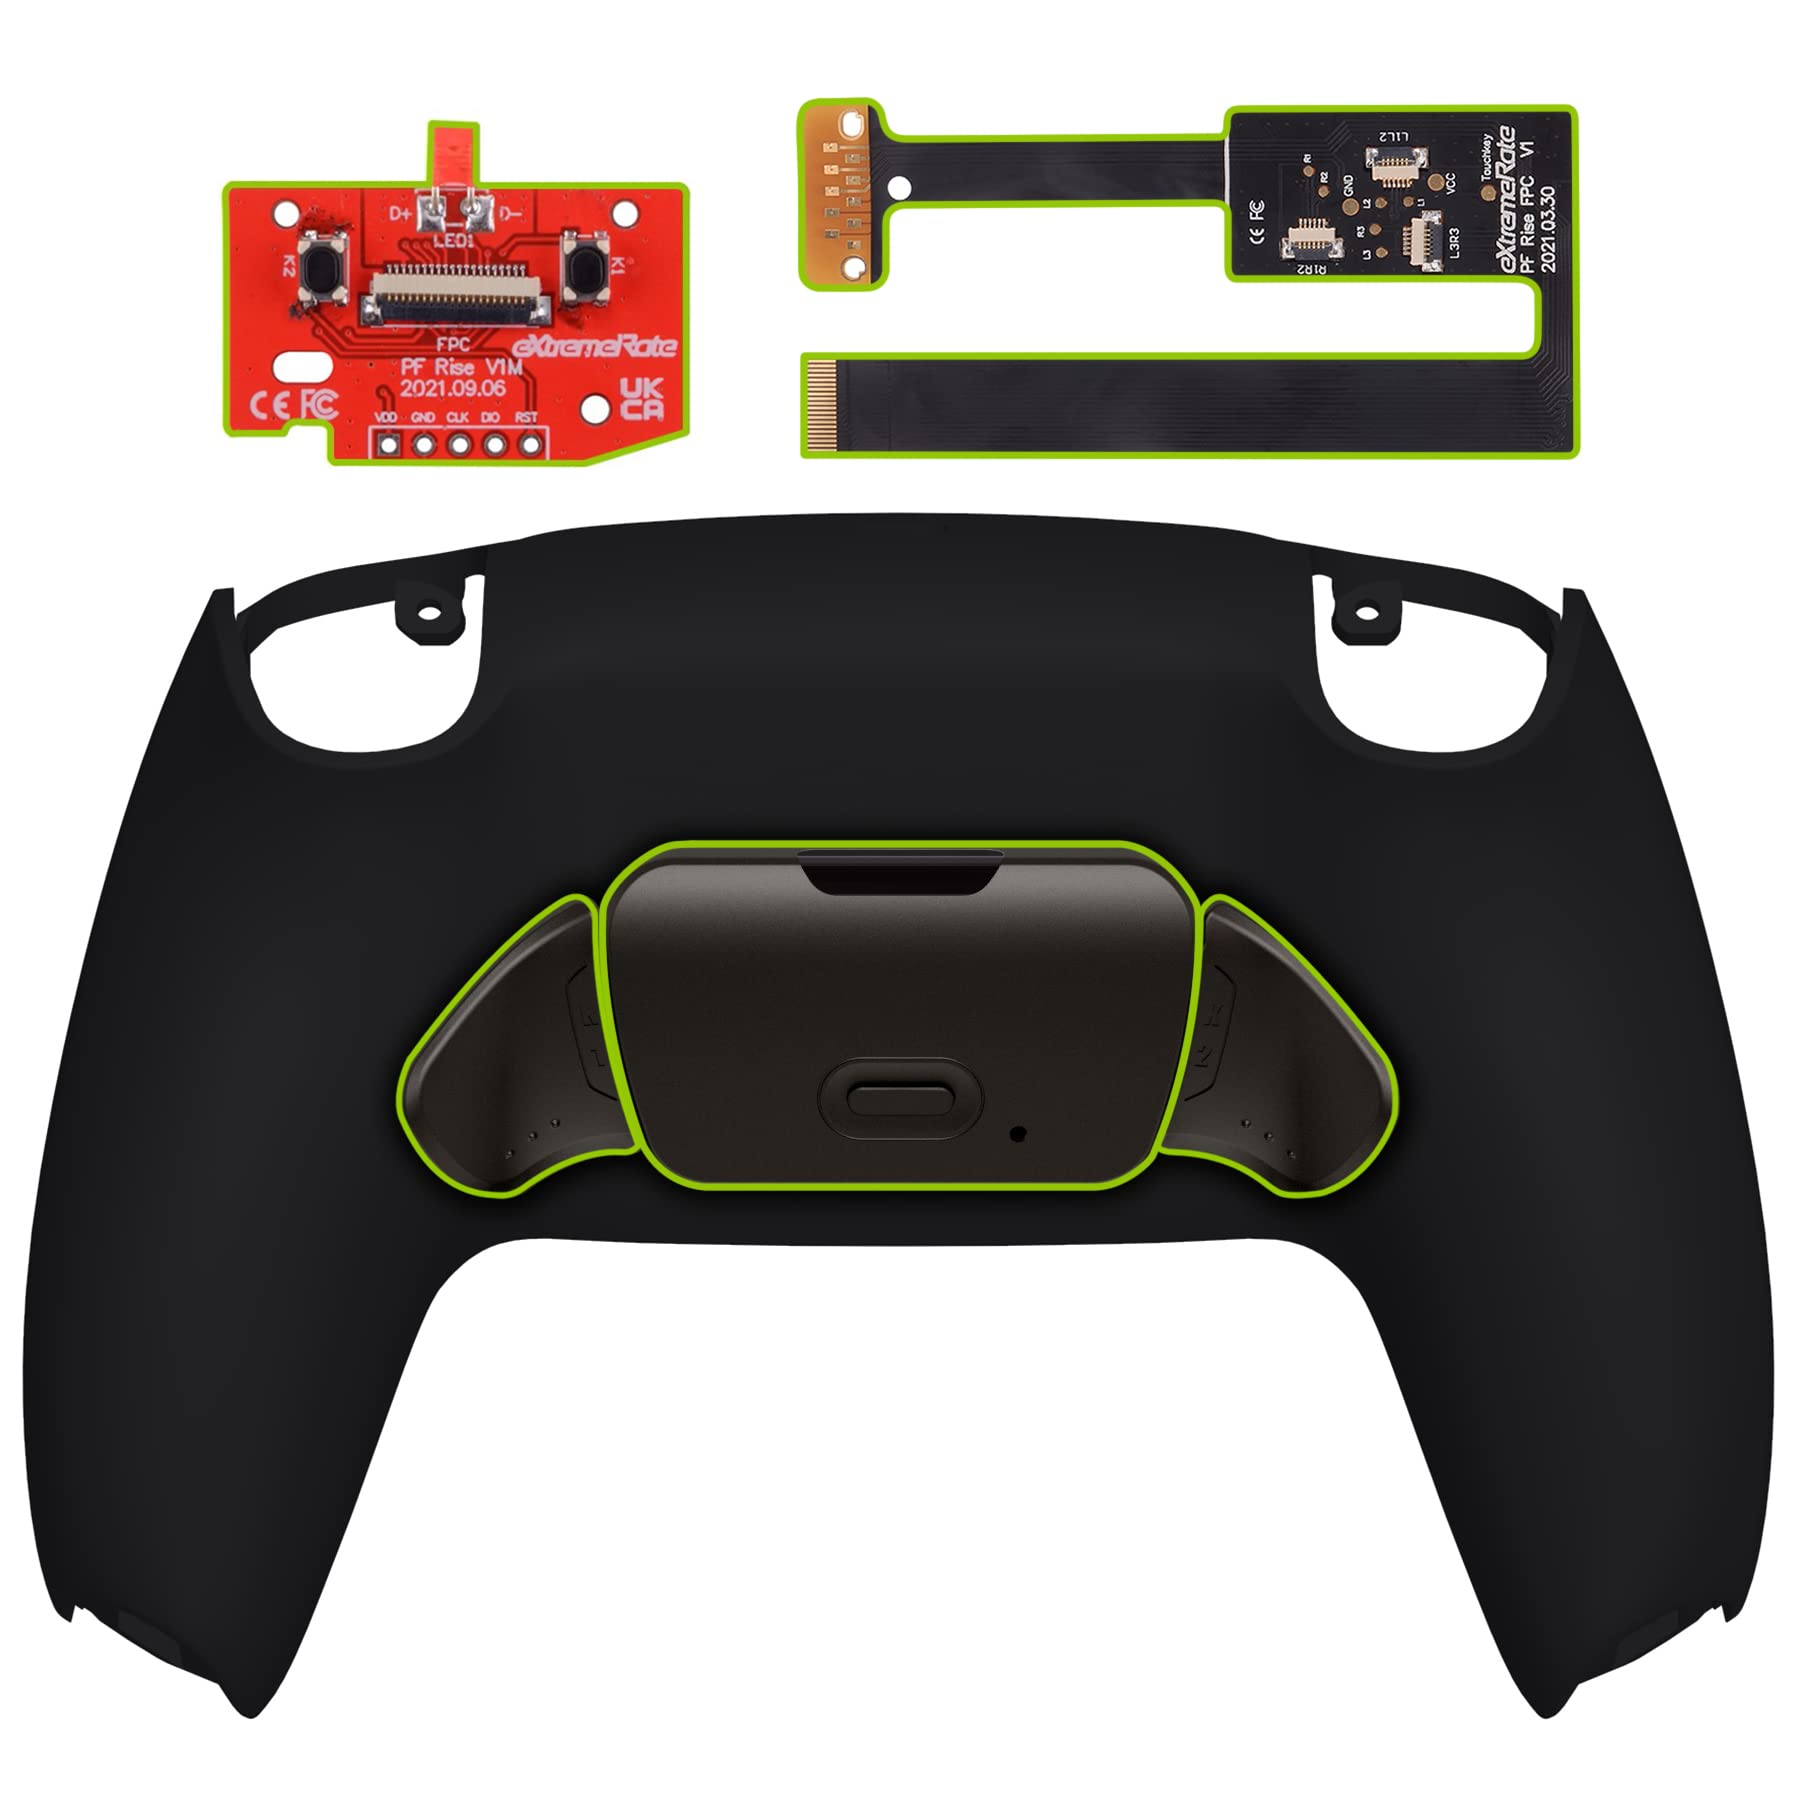 Game controller with buttons being remapped